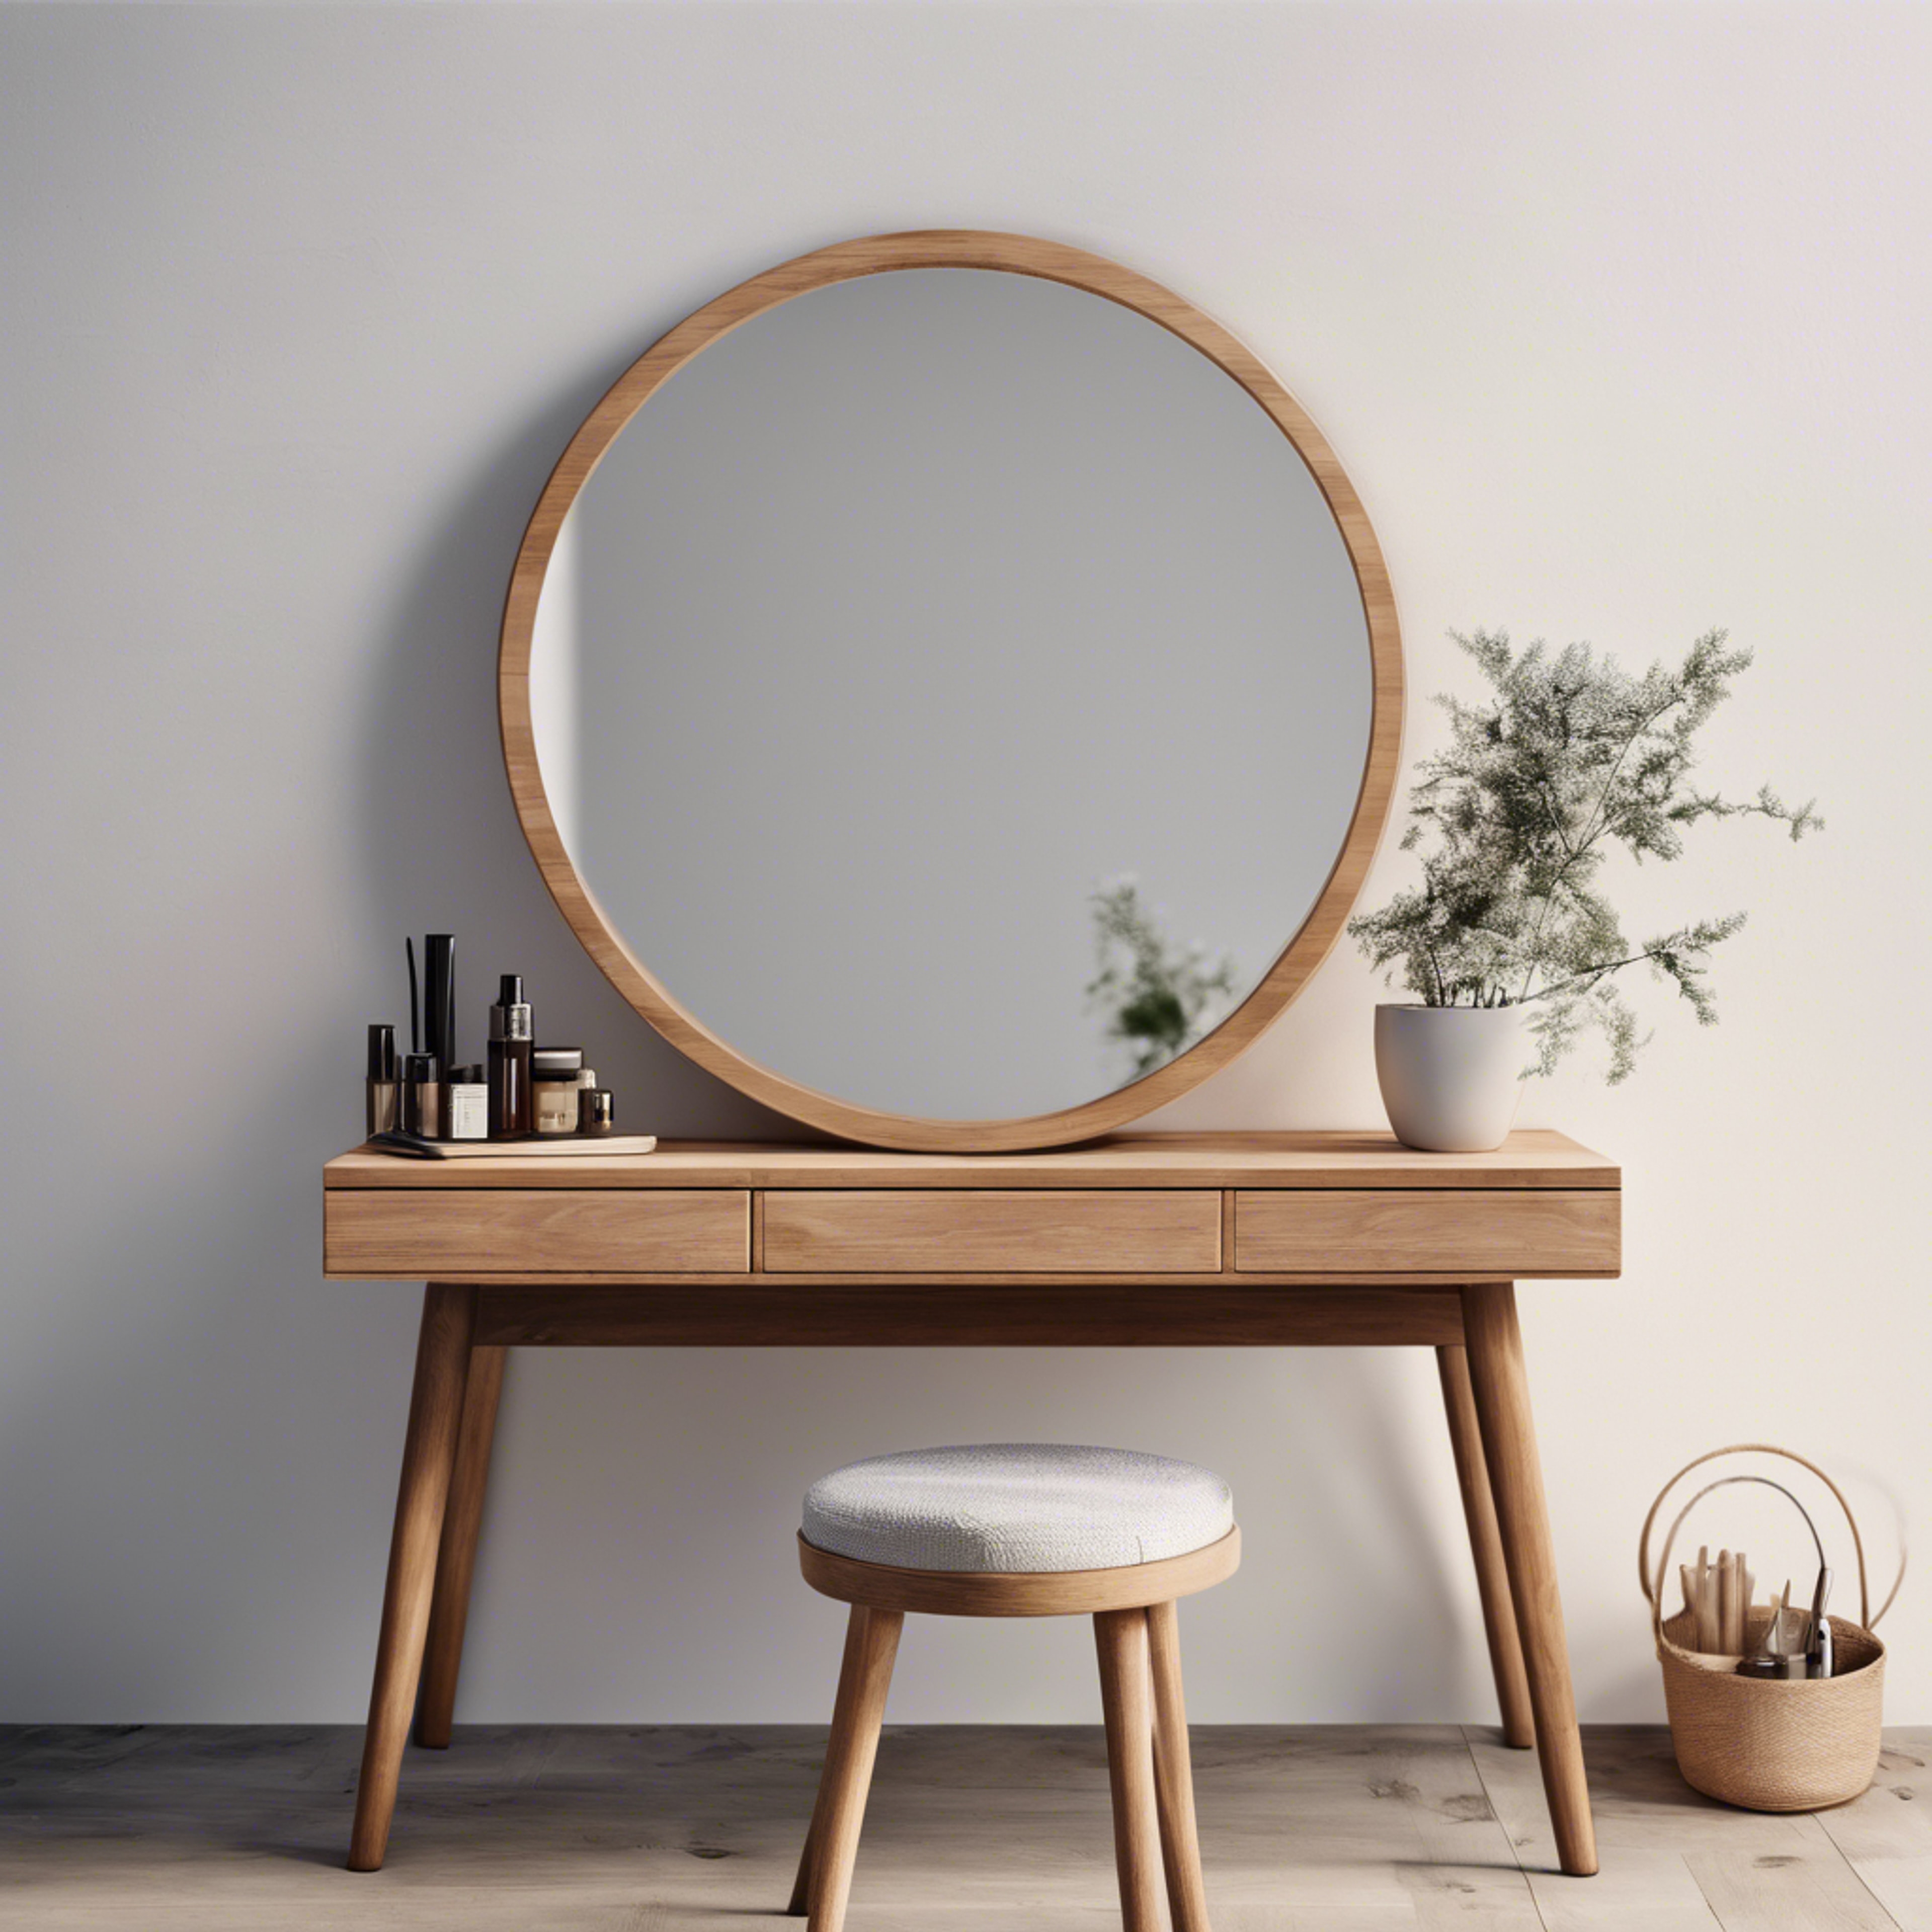 A minimalistic dressing table design with a simple rounded mirror and bare wood. Wallpaper[ca205f5a77af495c8733]